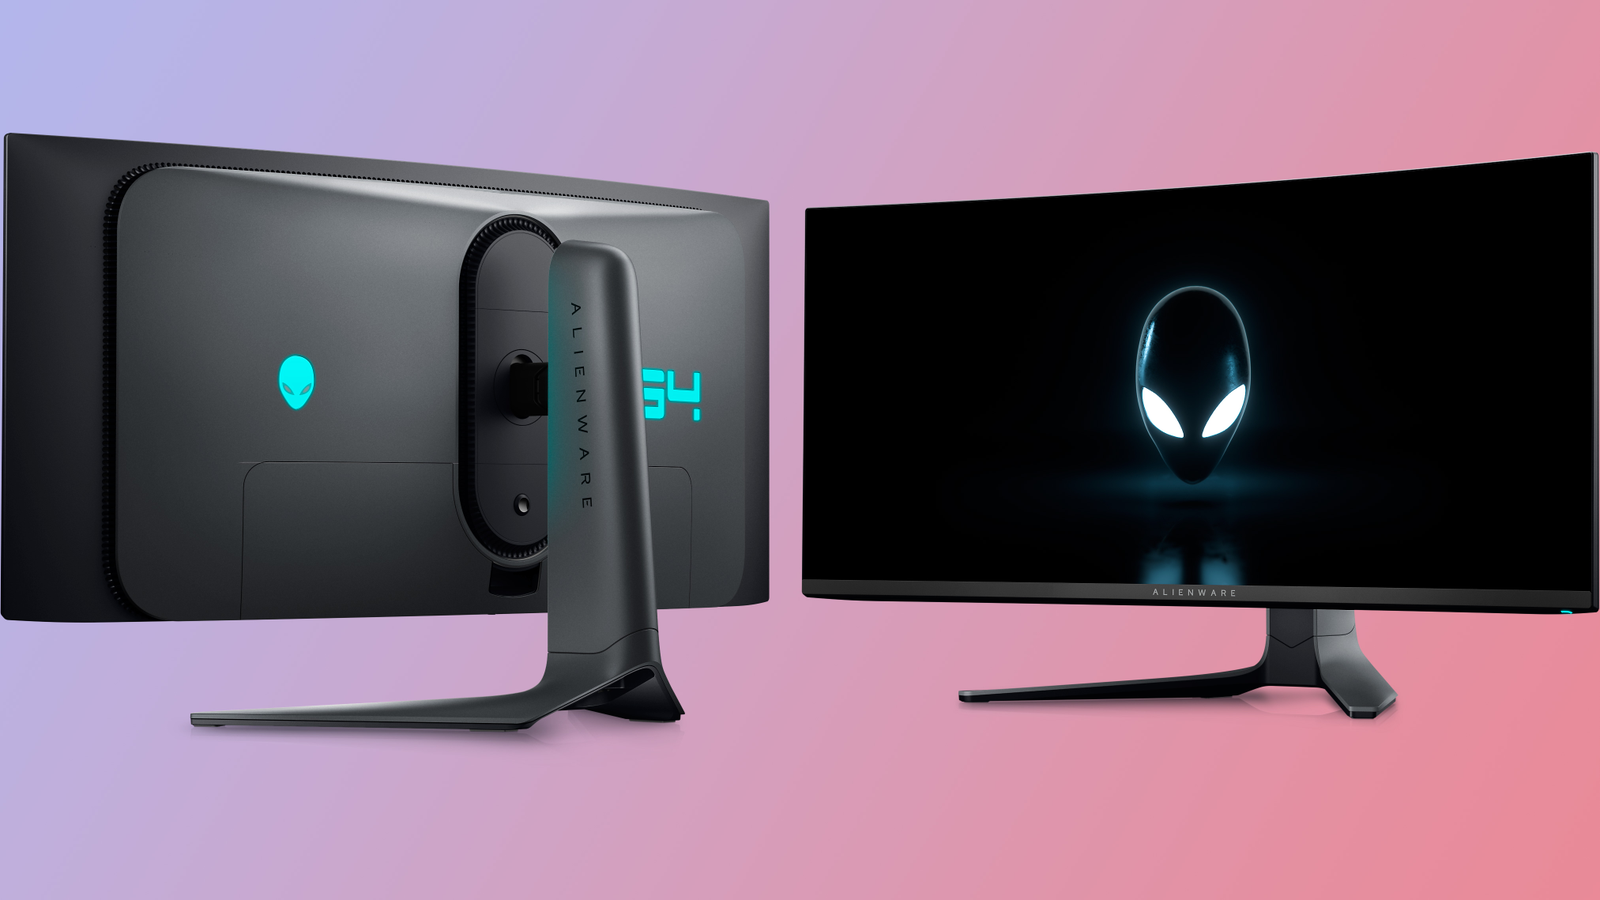 Save $200 on one of our favorite OLED gaming monitors — the Alienware  AW3423DWF